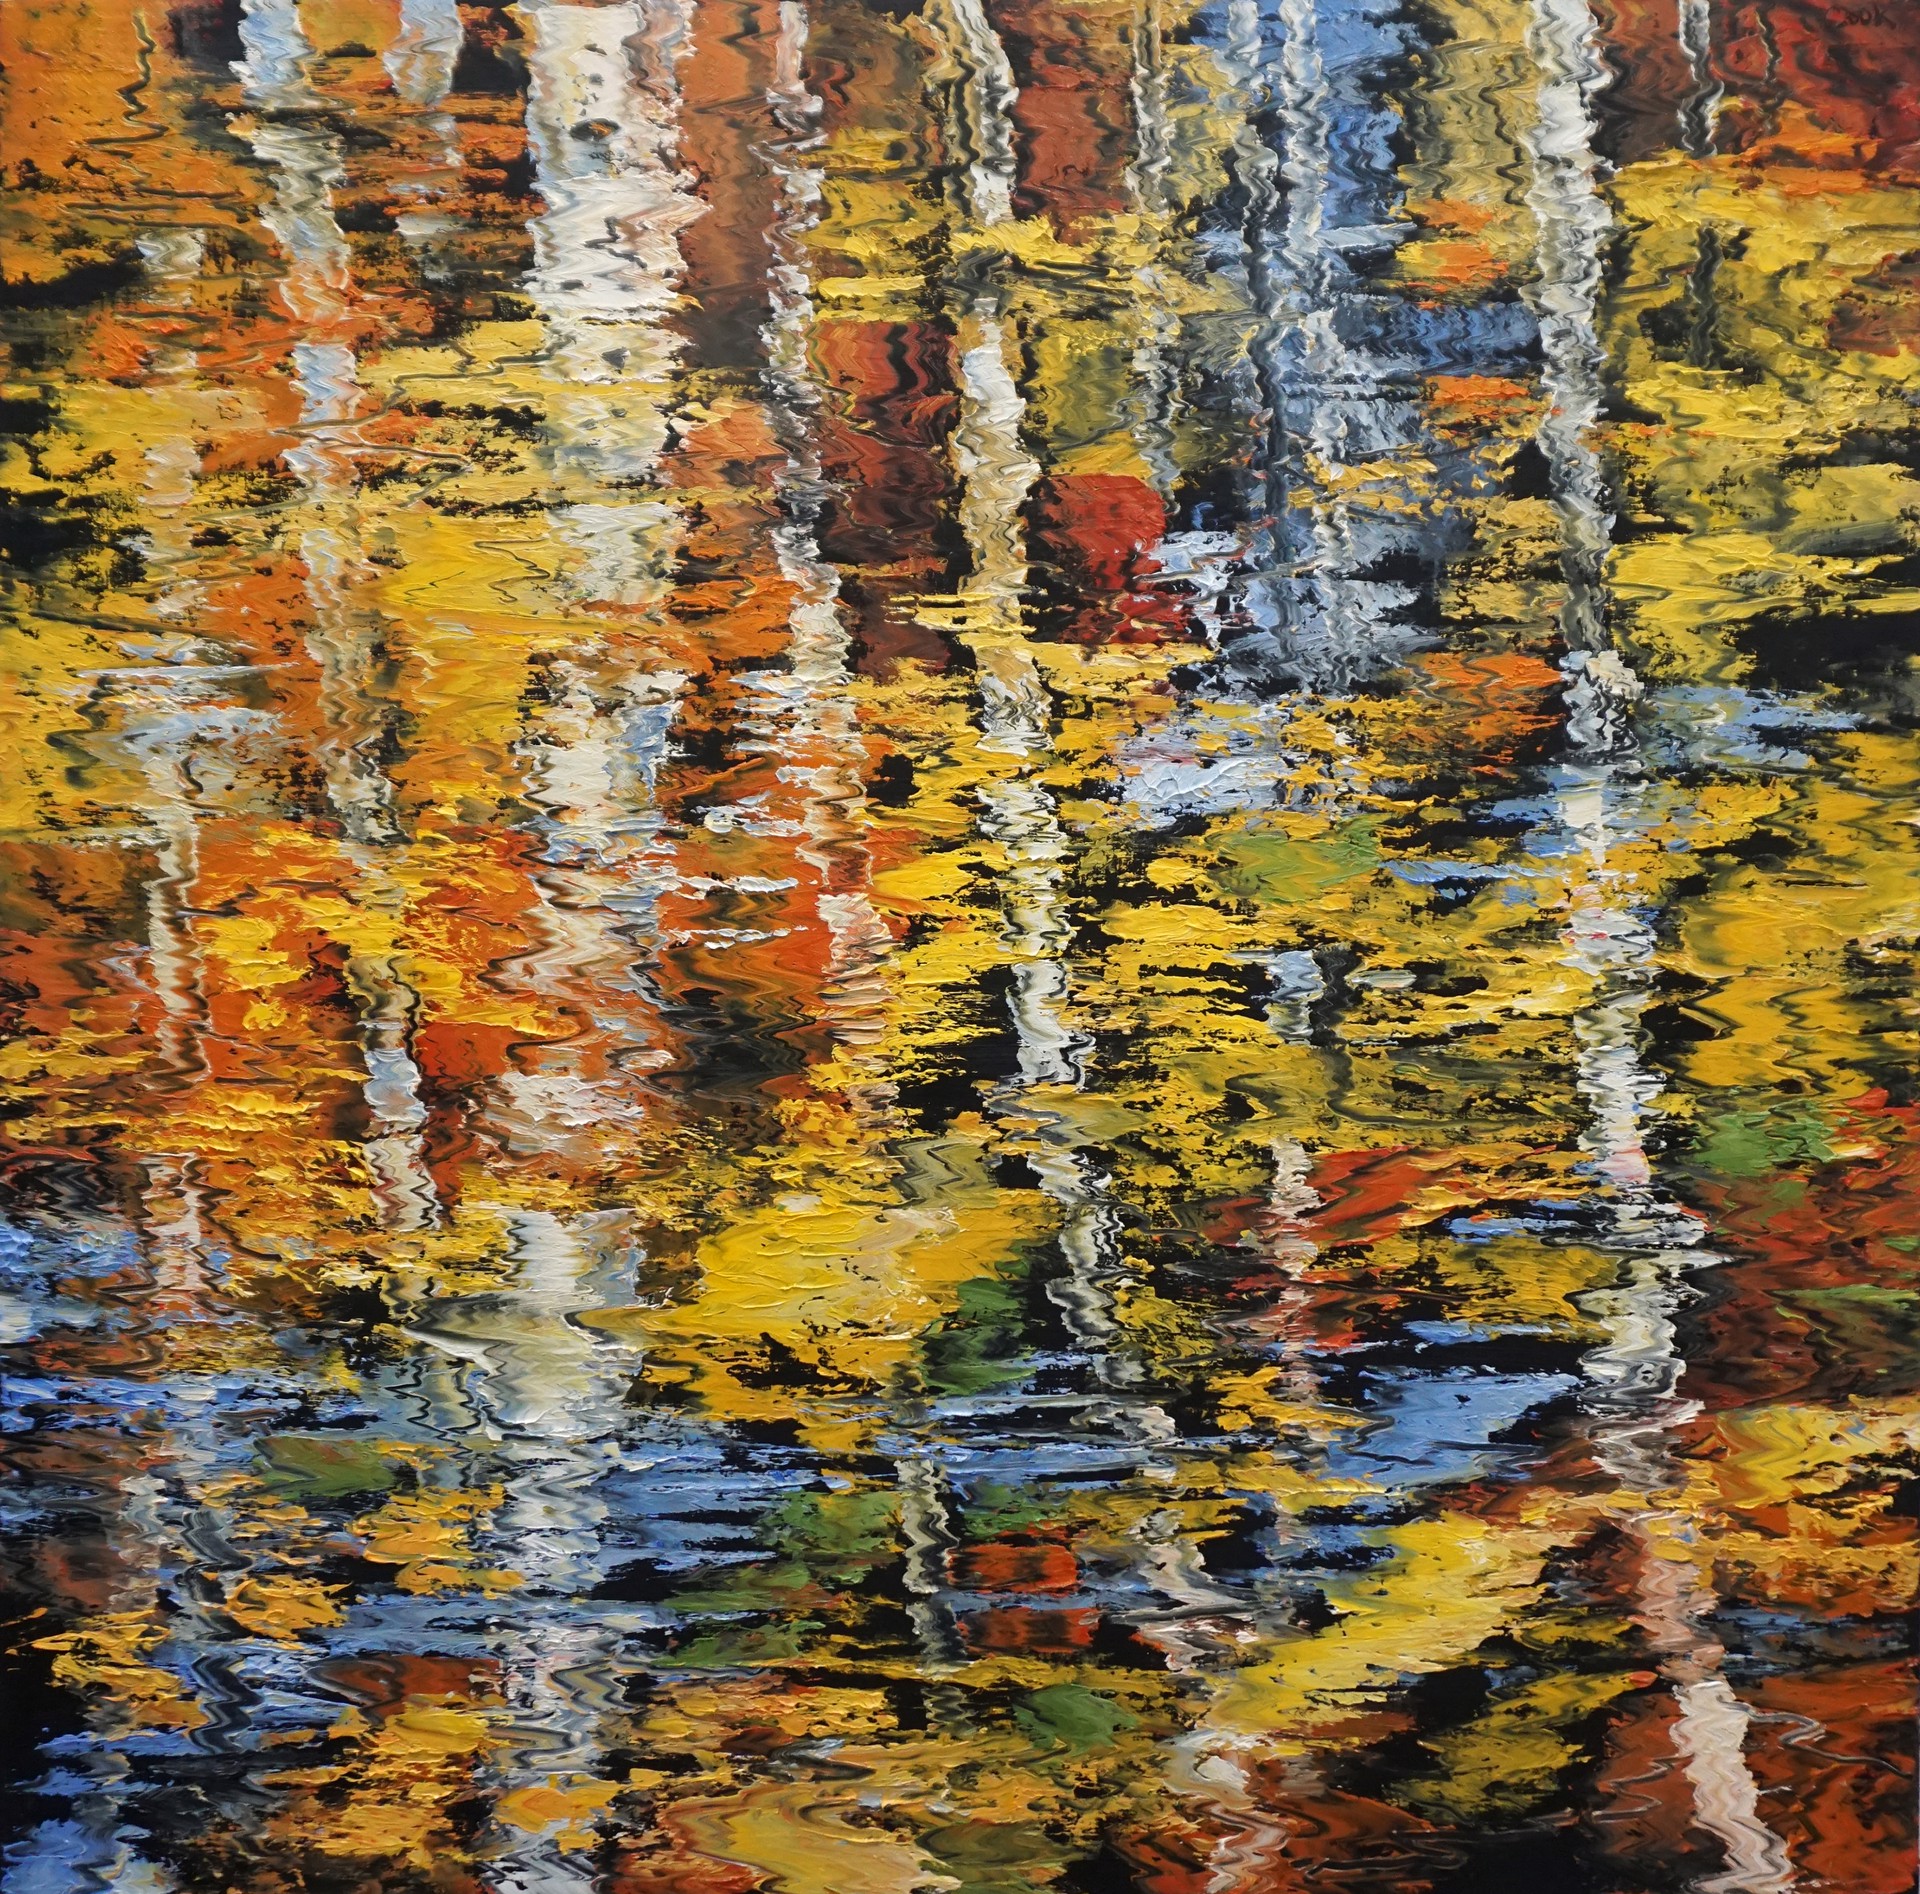 Pine Top - Aspen Reflections #1 by James Cook